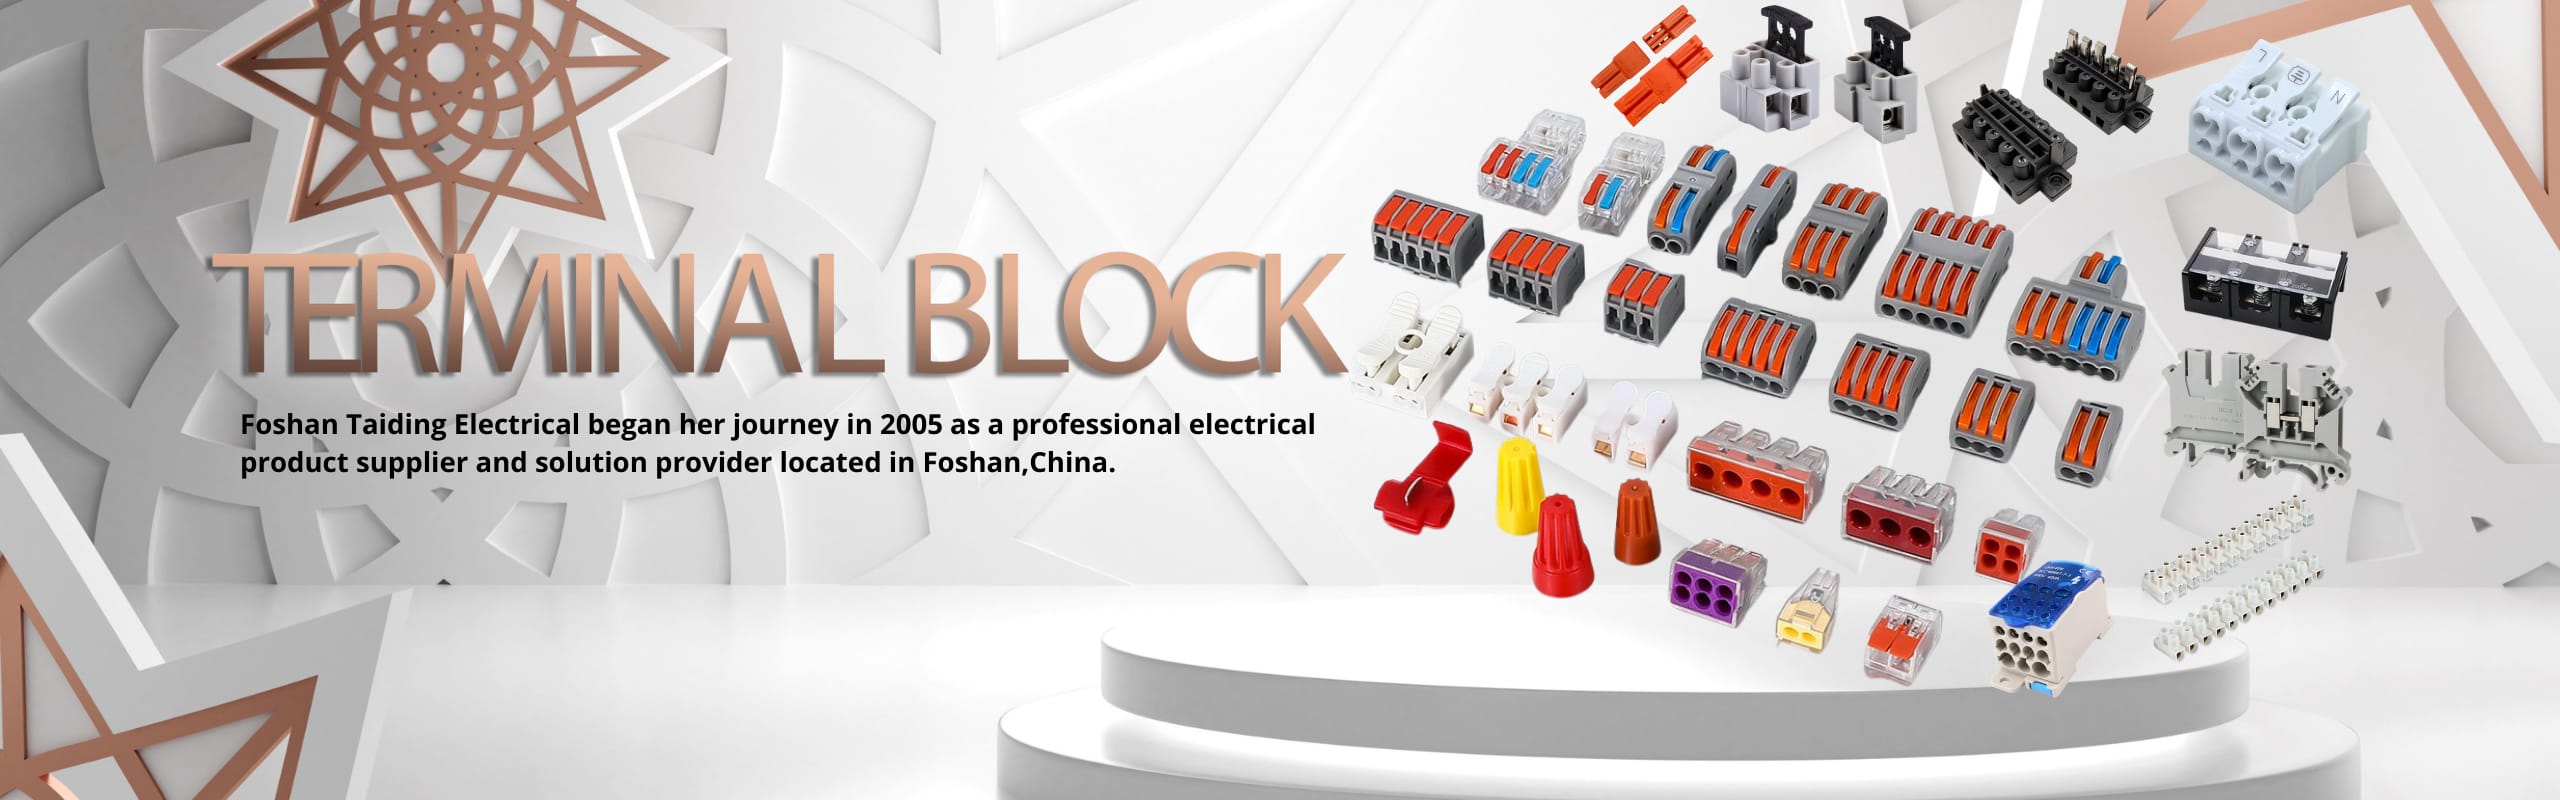 Foshan Taiding are the manufacturer of Terminal Block